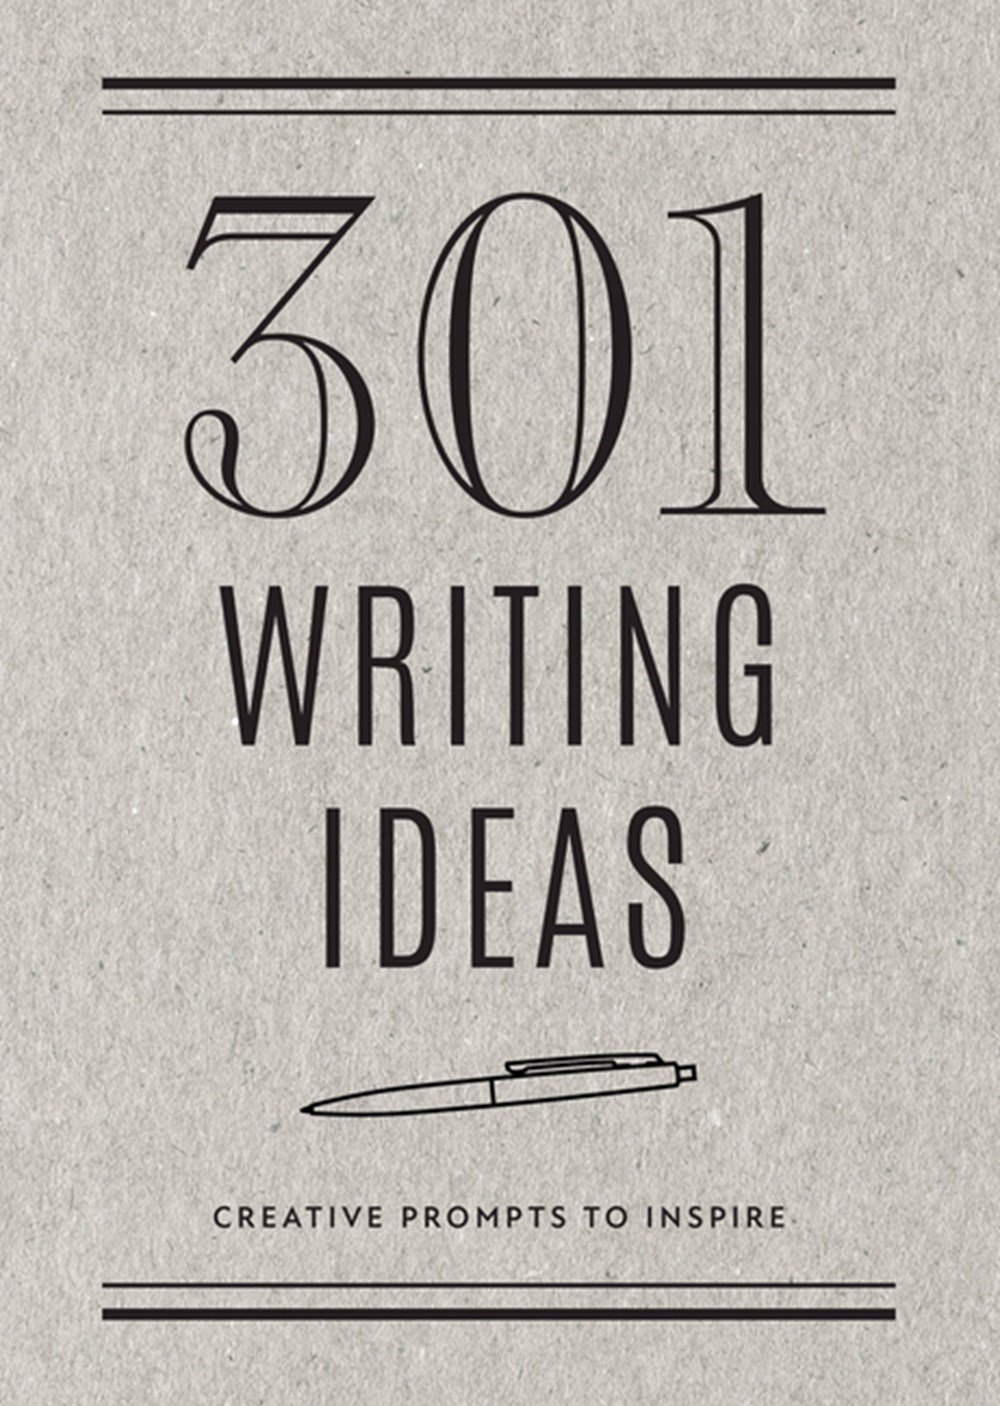 301 Writing Ideas - Second Edition Creative Prompts to Inspire